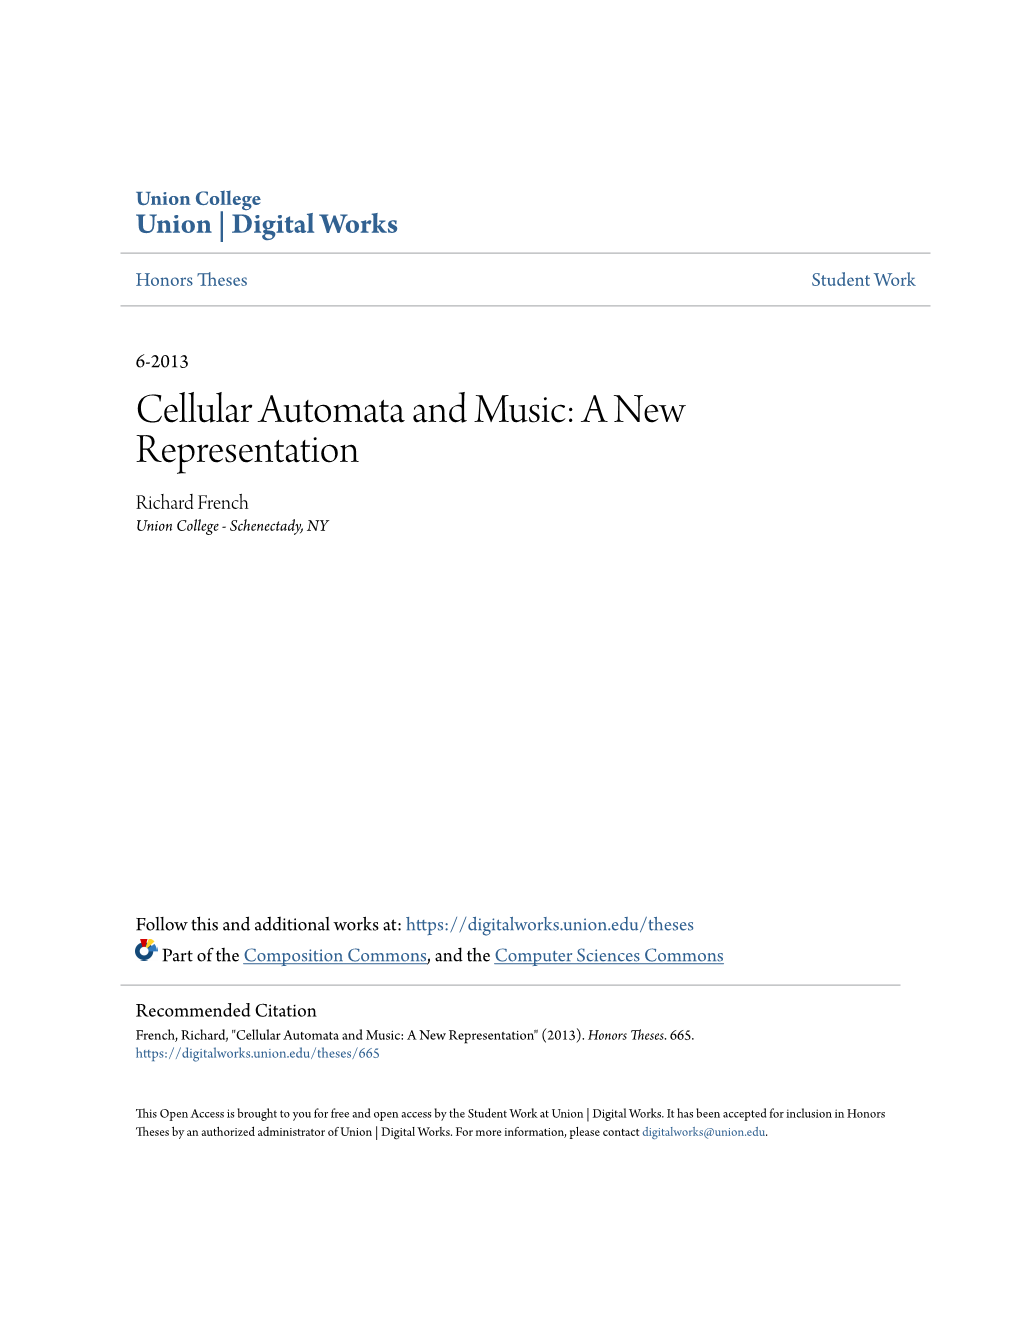 Cellular Automata and Music: a New Representation Richard French Union College - Schenectady, NY